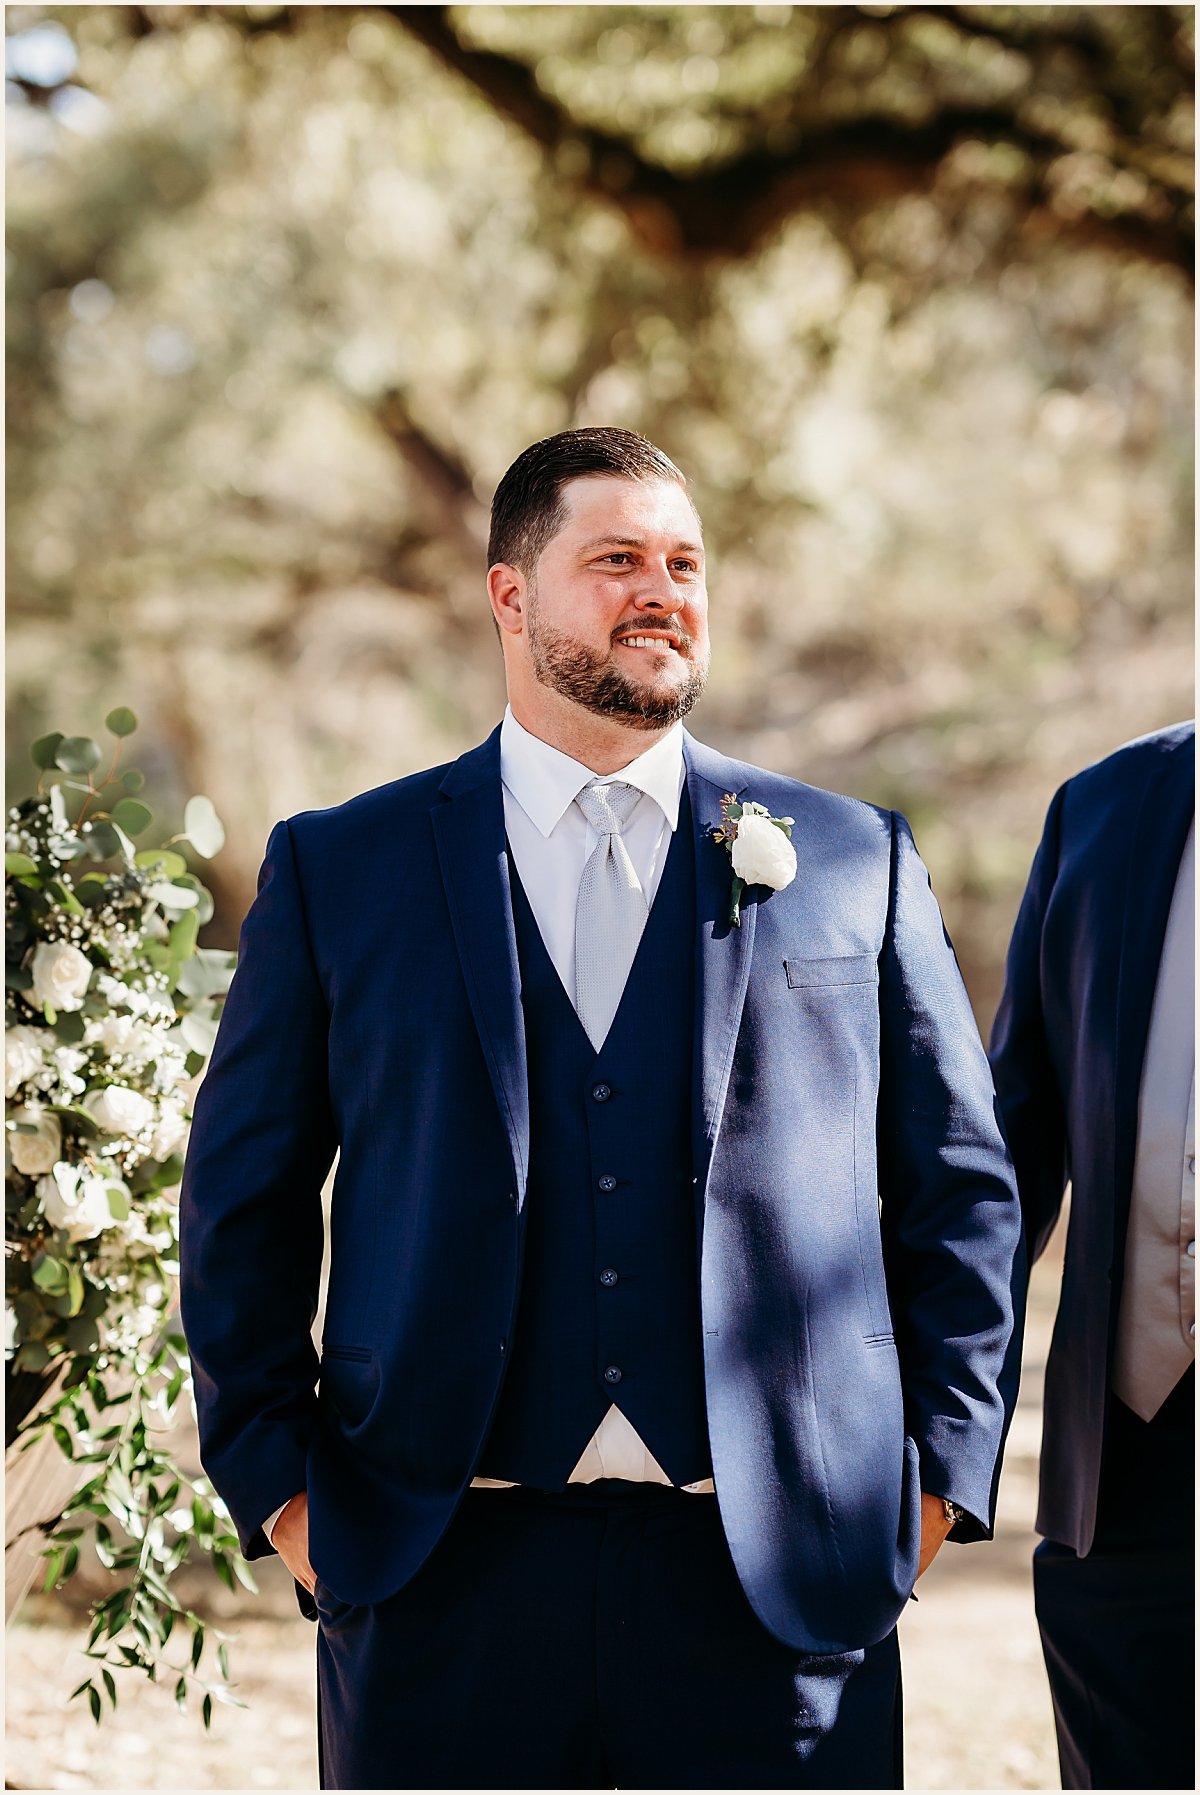 Grooms first look at his bride walking down the aisle | Lauren Crumpler Photography | Texas Wedding Photographer